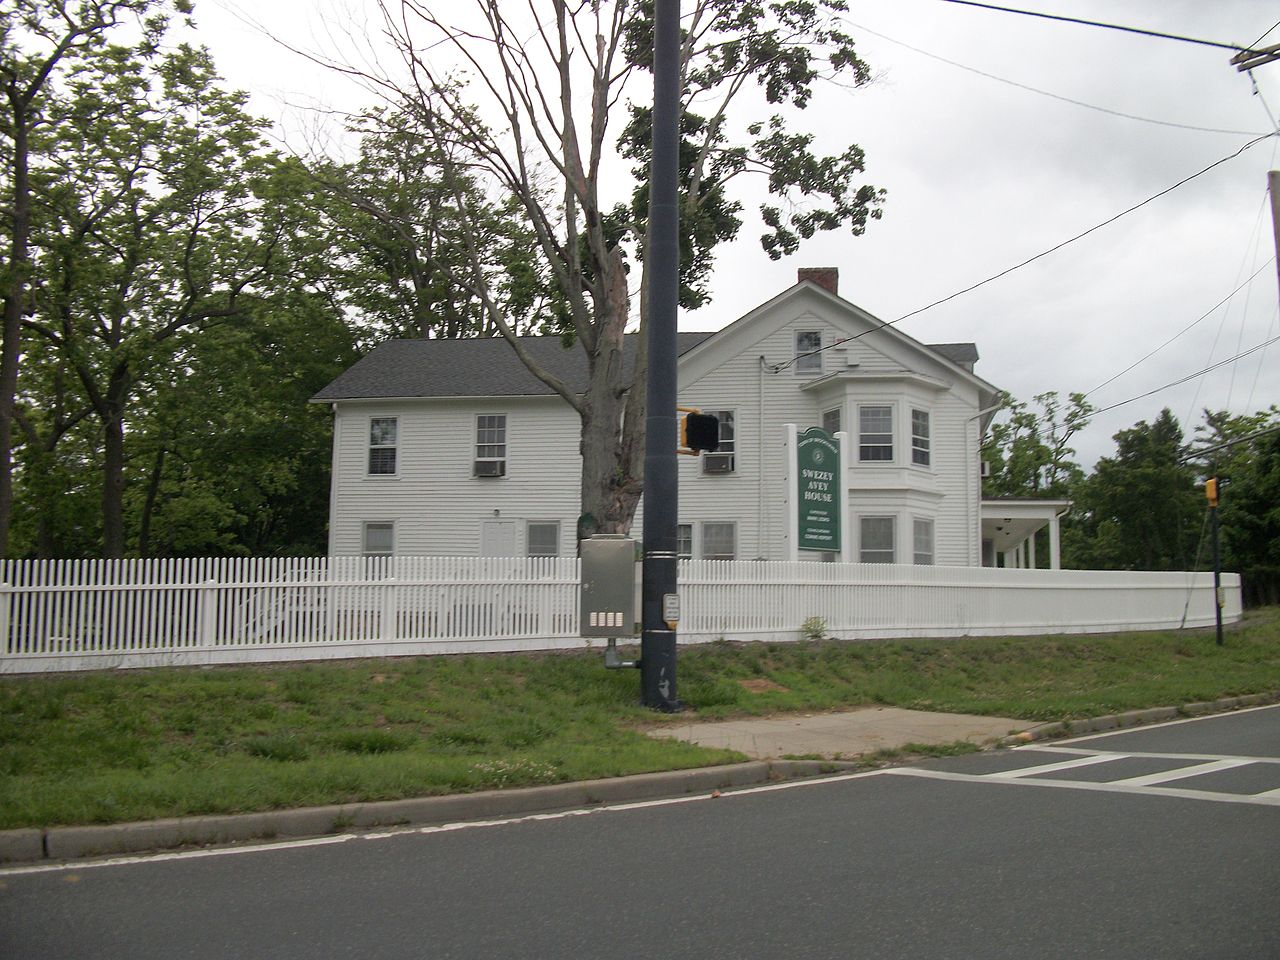 Haus and Hues in Yaphank